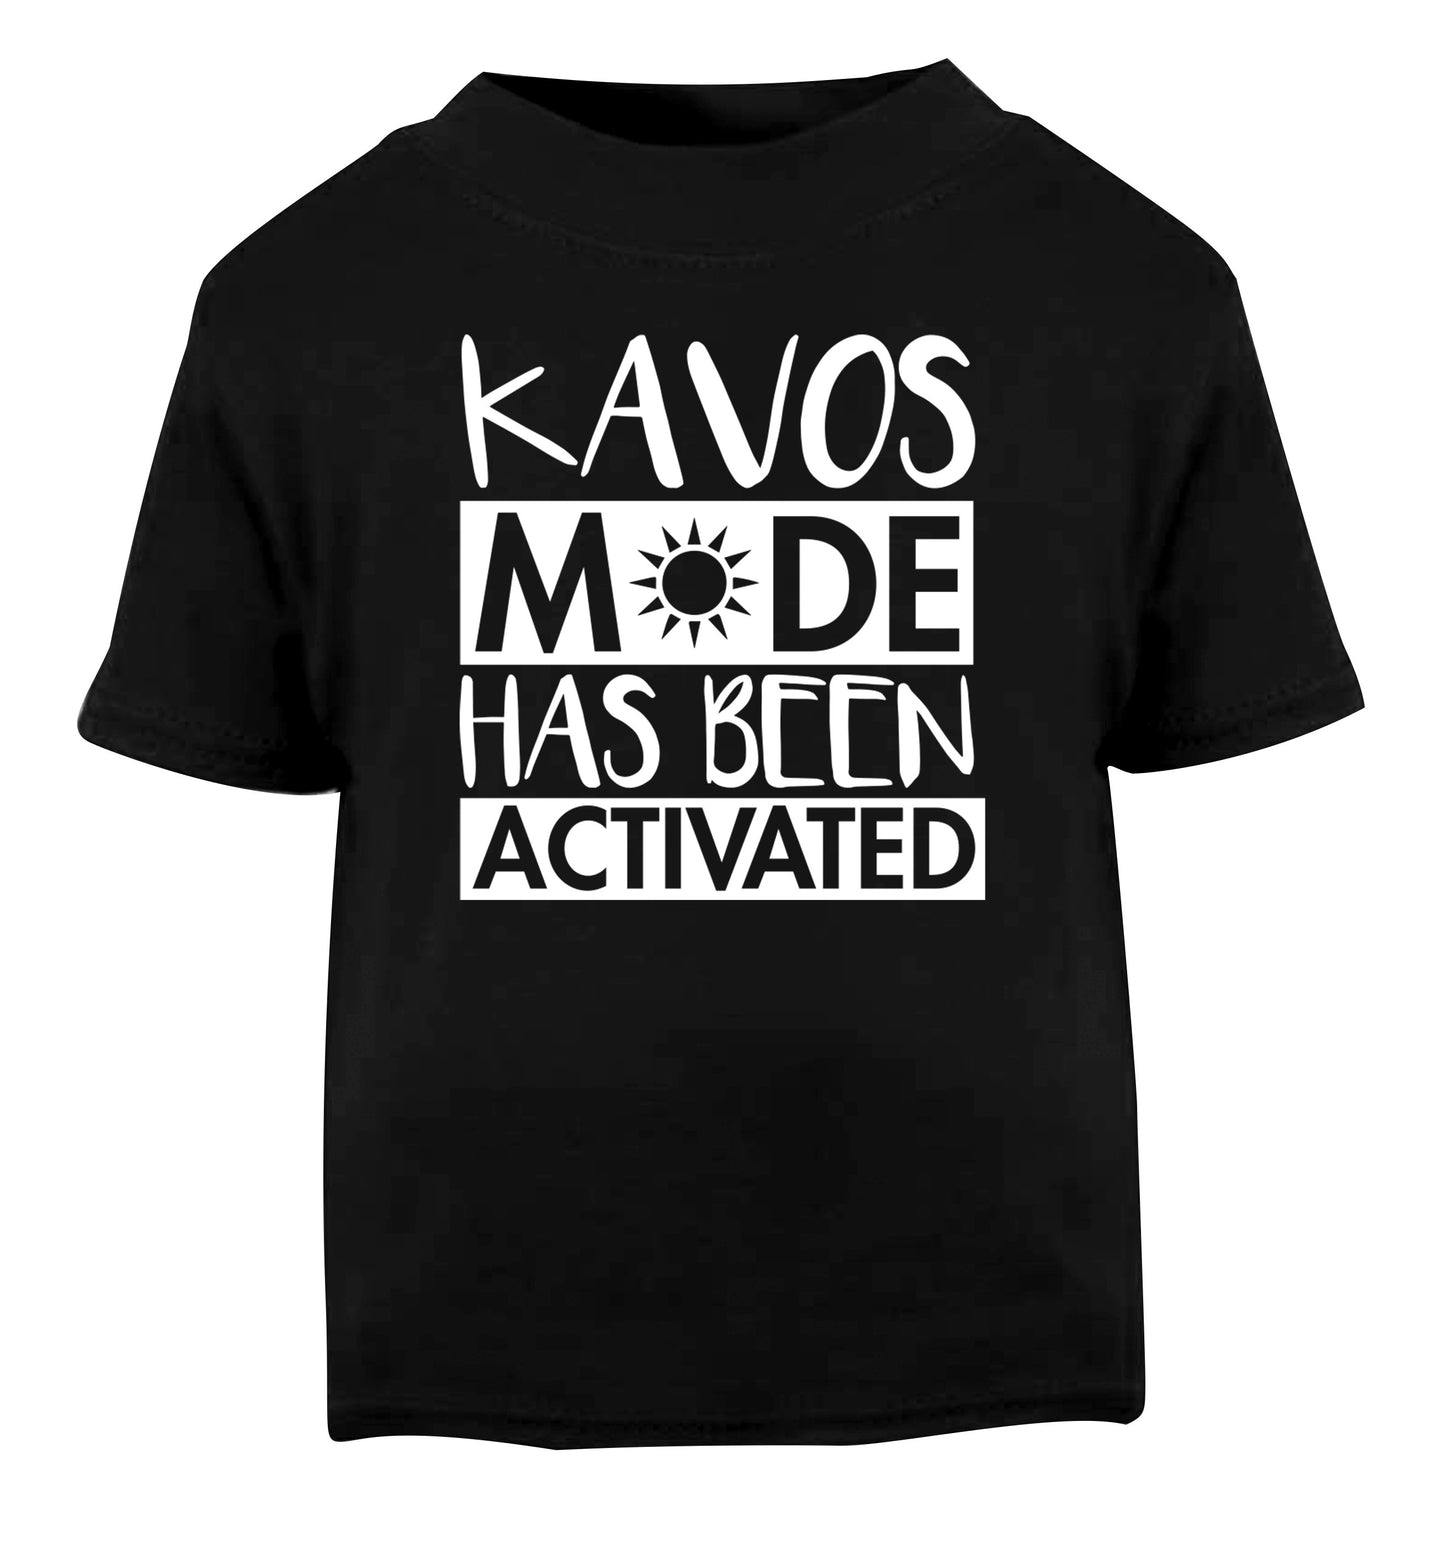 Kavos mode has been activated Black Baby Toddler Tshirt 2 years